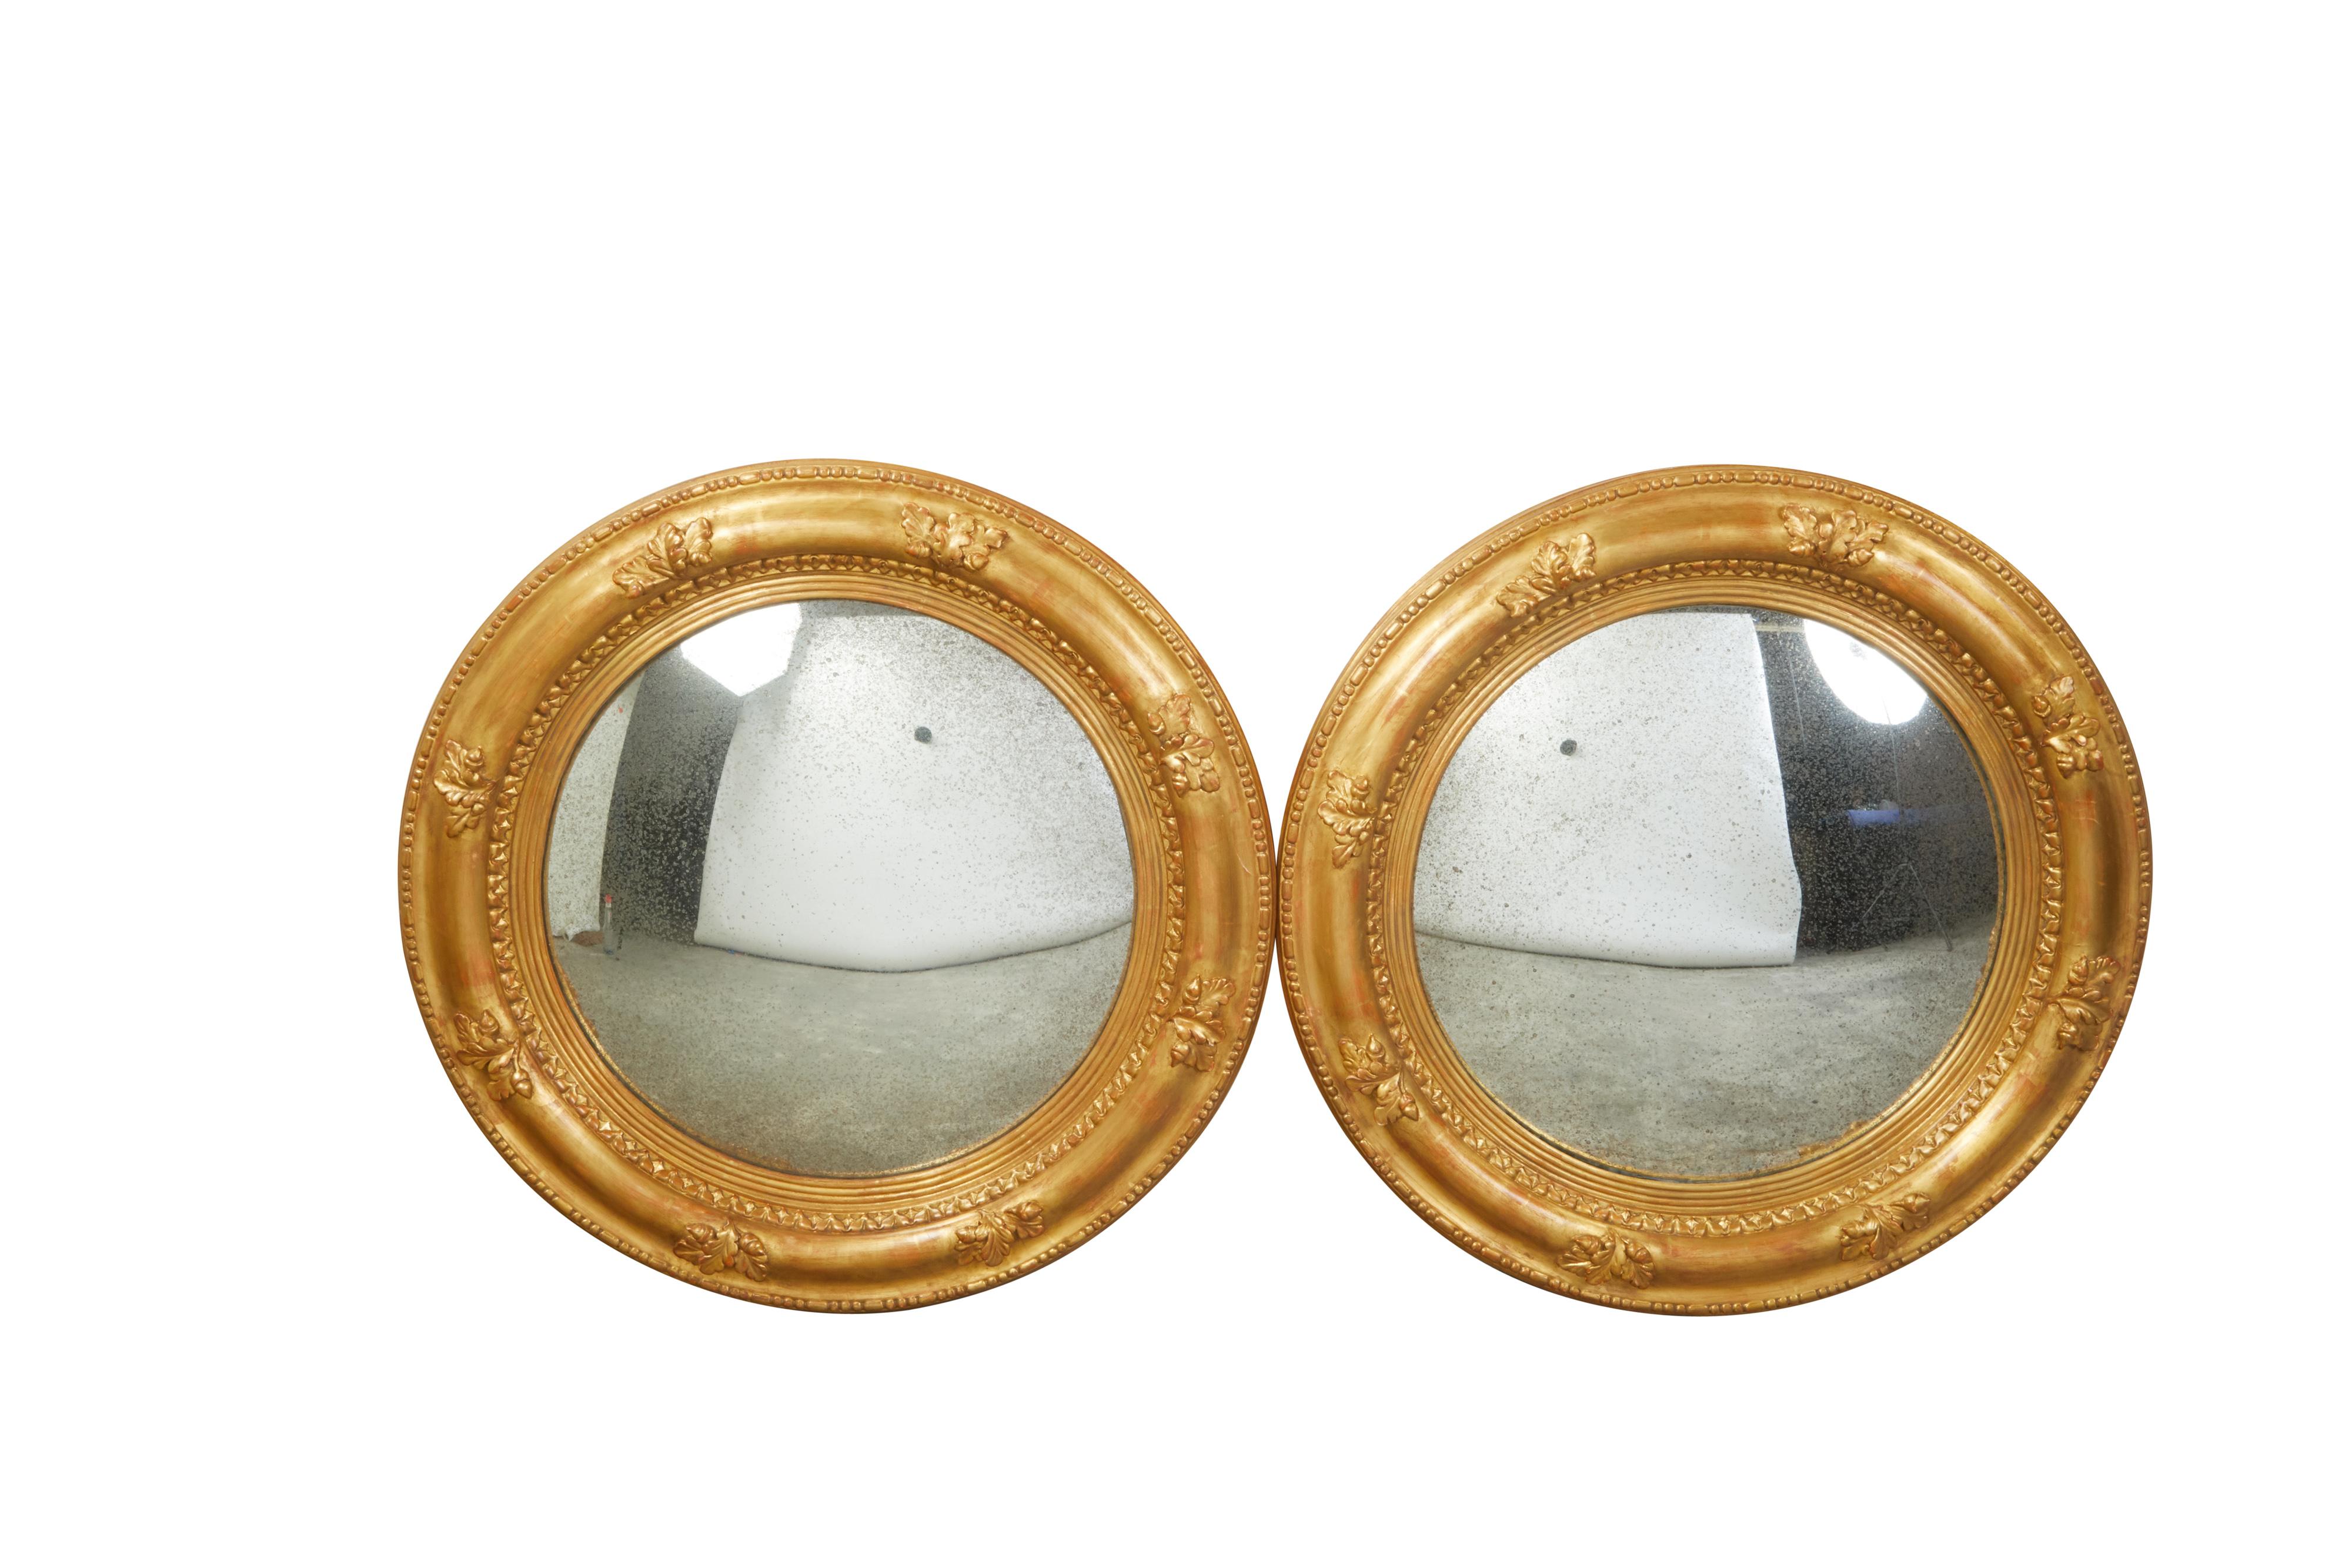 A pair of English giltwood convex mirrors from the mid 20th century, with carved acorns and foliage motifs. Created in England during the first half of the 20th century, each of this pair of giltwood mirrors features a circular frame accented with